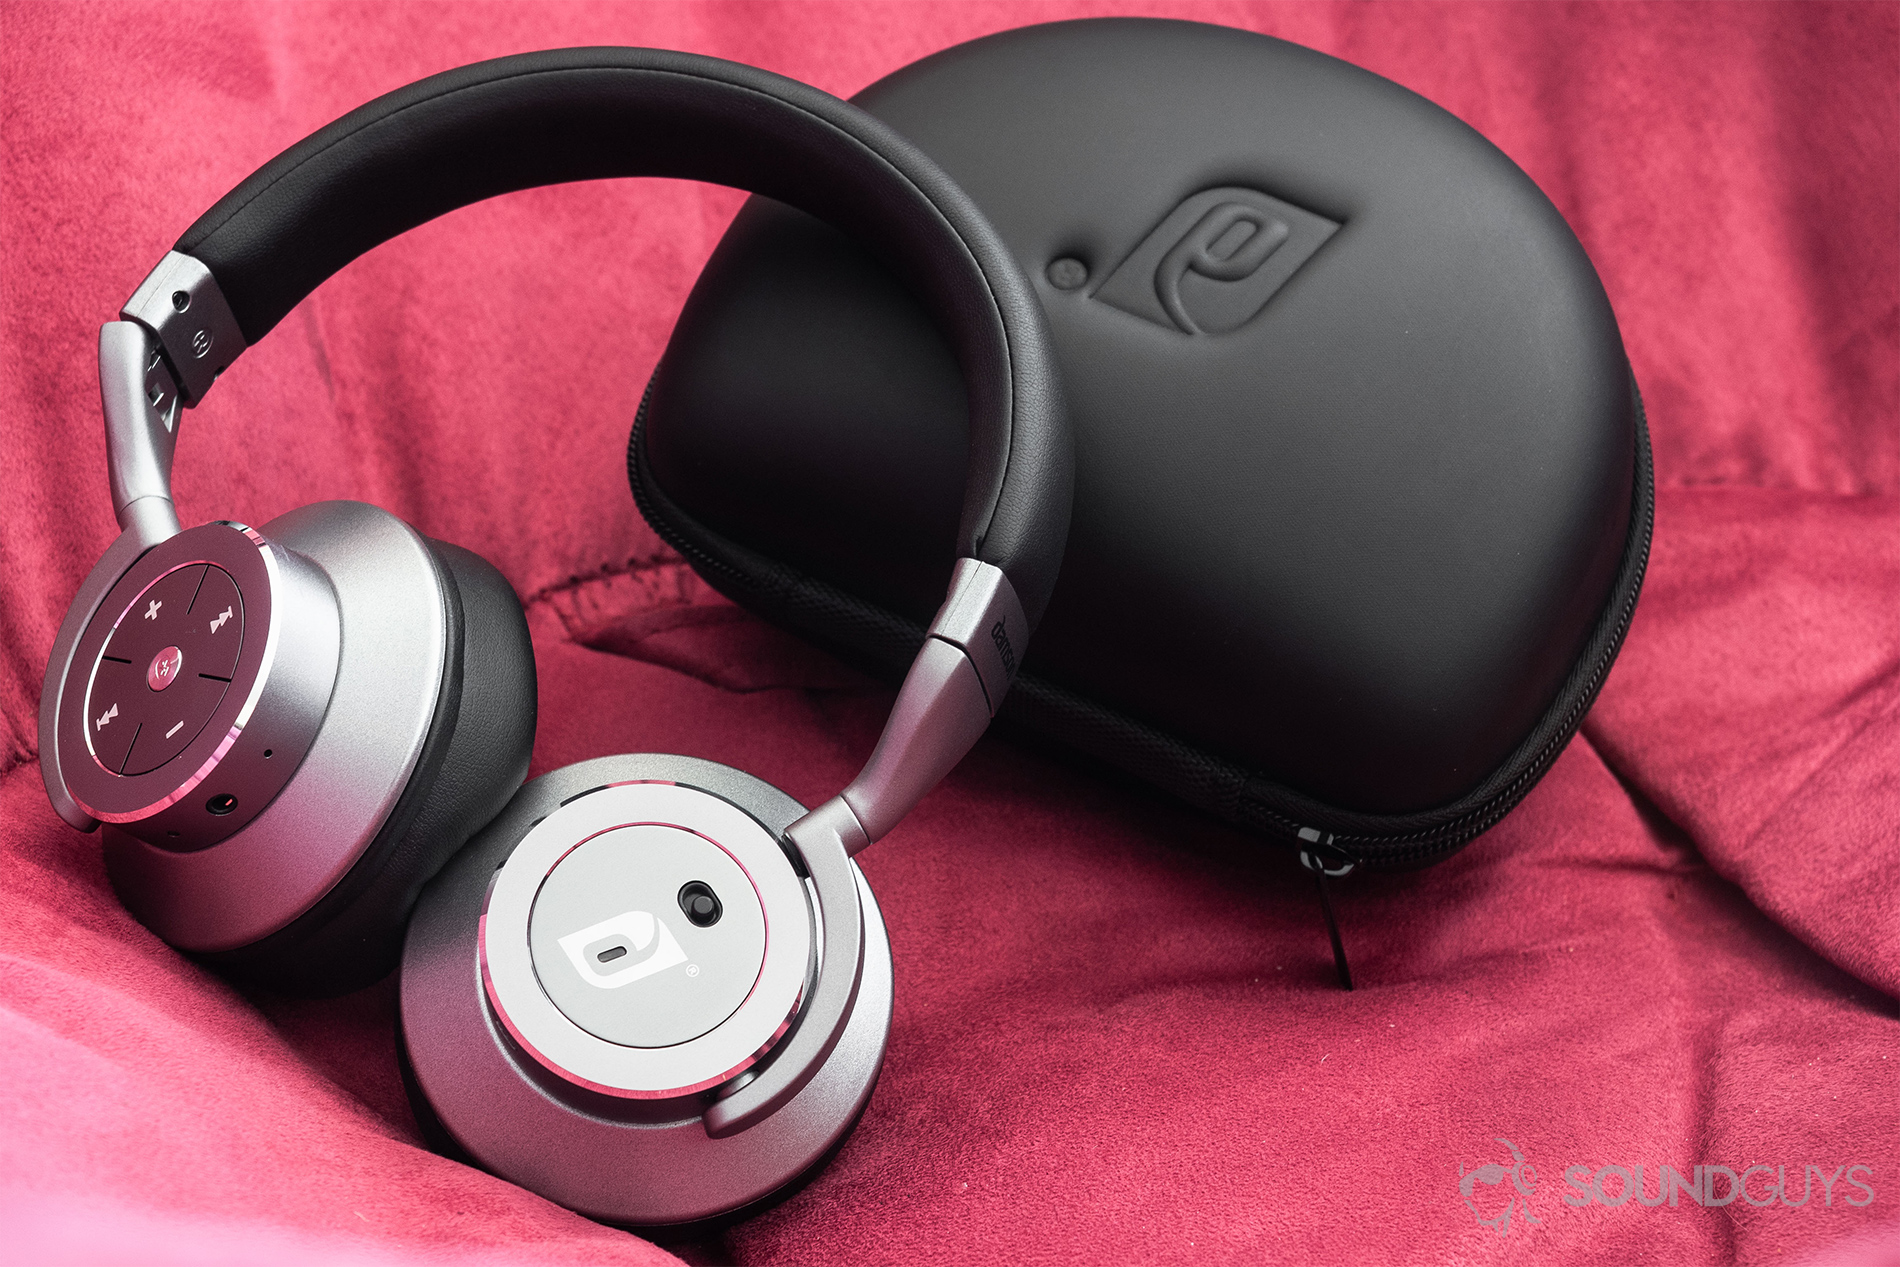 Damson HeadSpace Active Noise-Canceling review: The headphones in front of the D-shaped hard-shell carrying case.